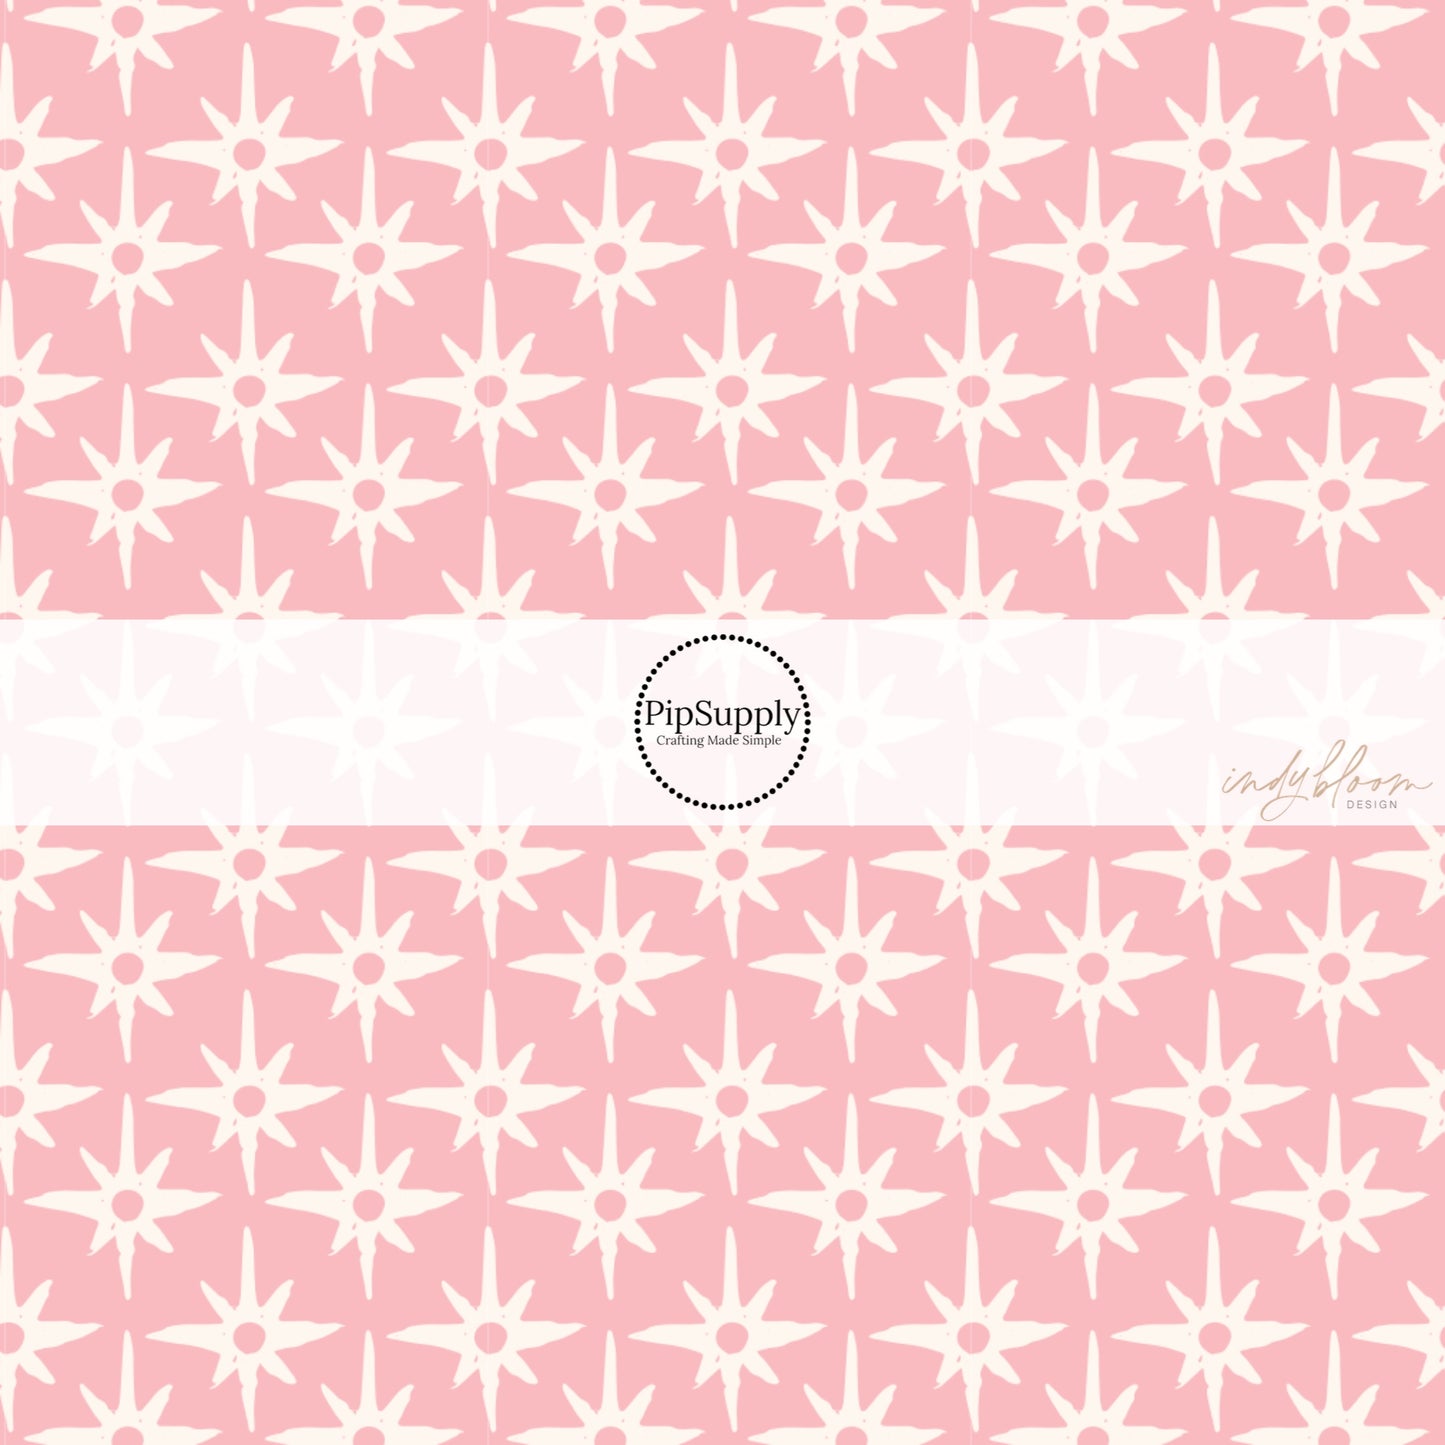 This summer fabric by the yard feature compass star pattern on pink. This fun summer themed fabric can be used for all your sewing and crafting needs!